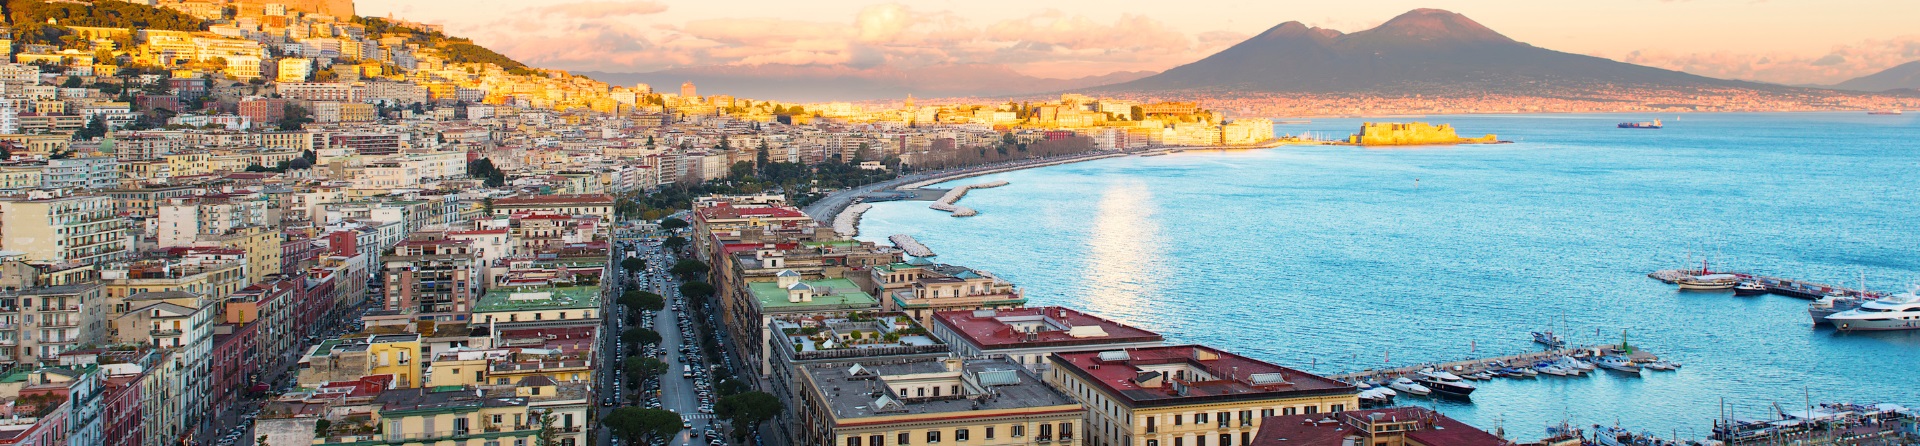 Is it worth visiting southern Italy?